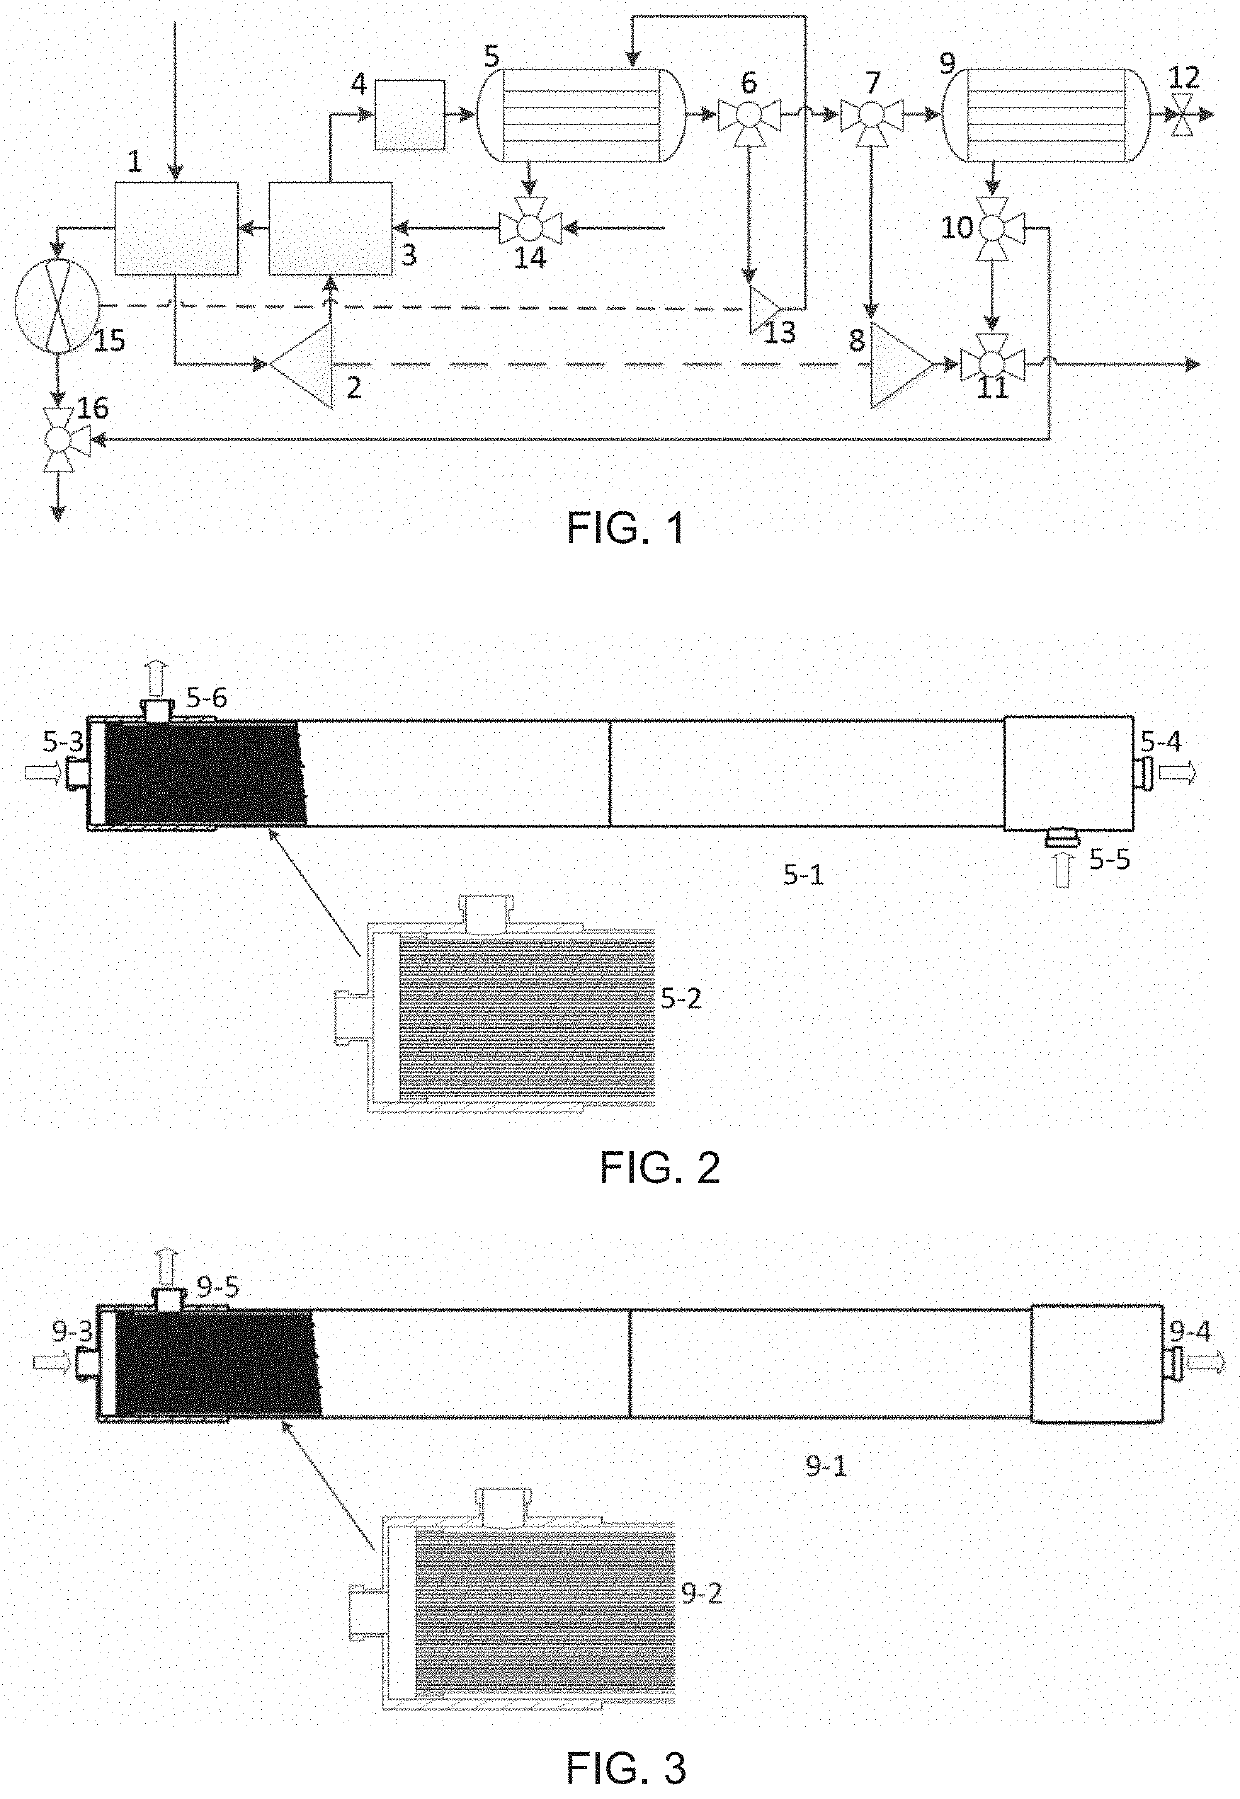 Aircraft environmental control and fuel tank inerting coupling system based on membrane separation method